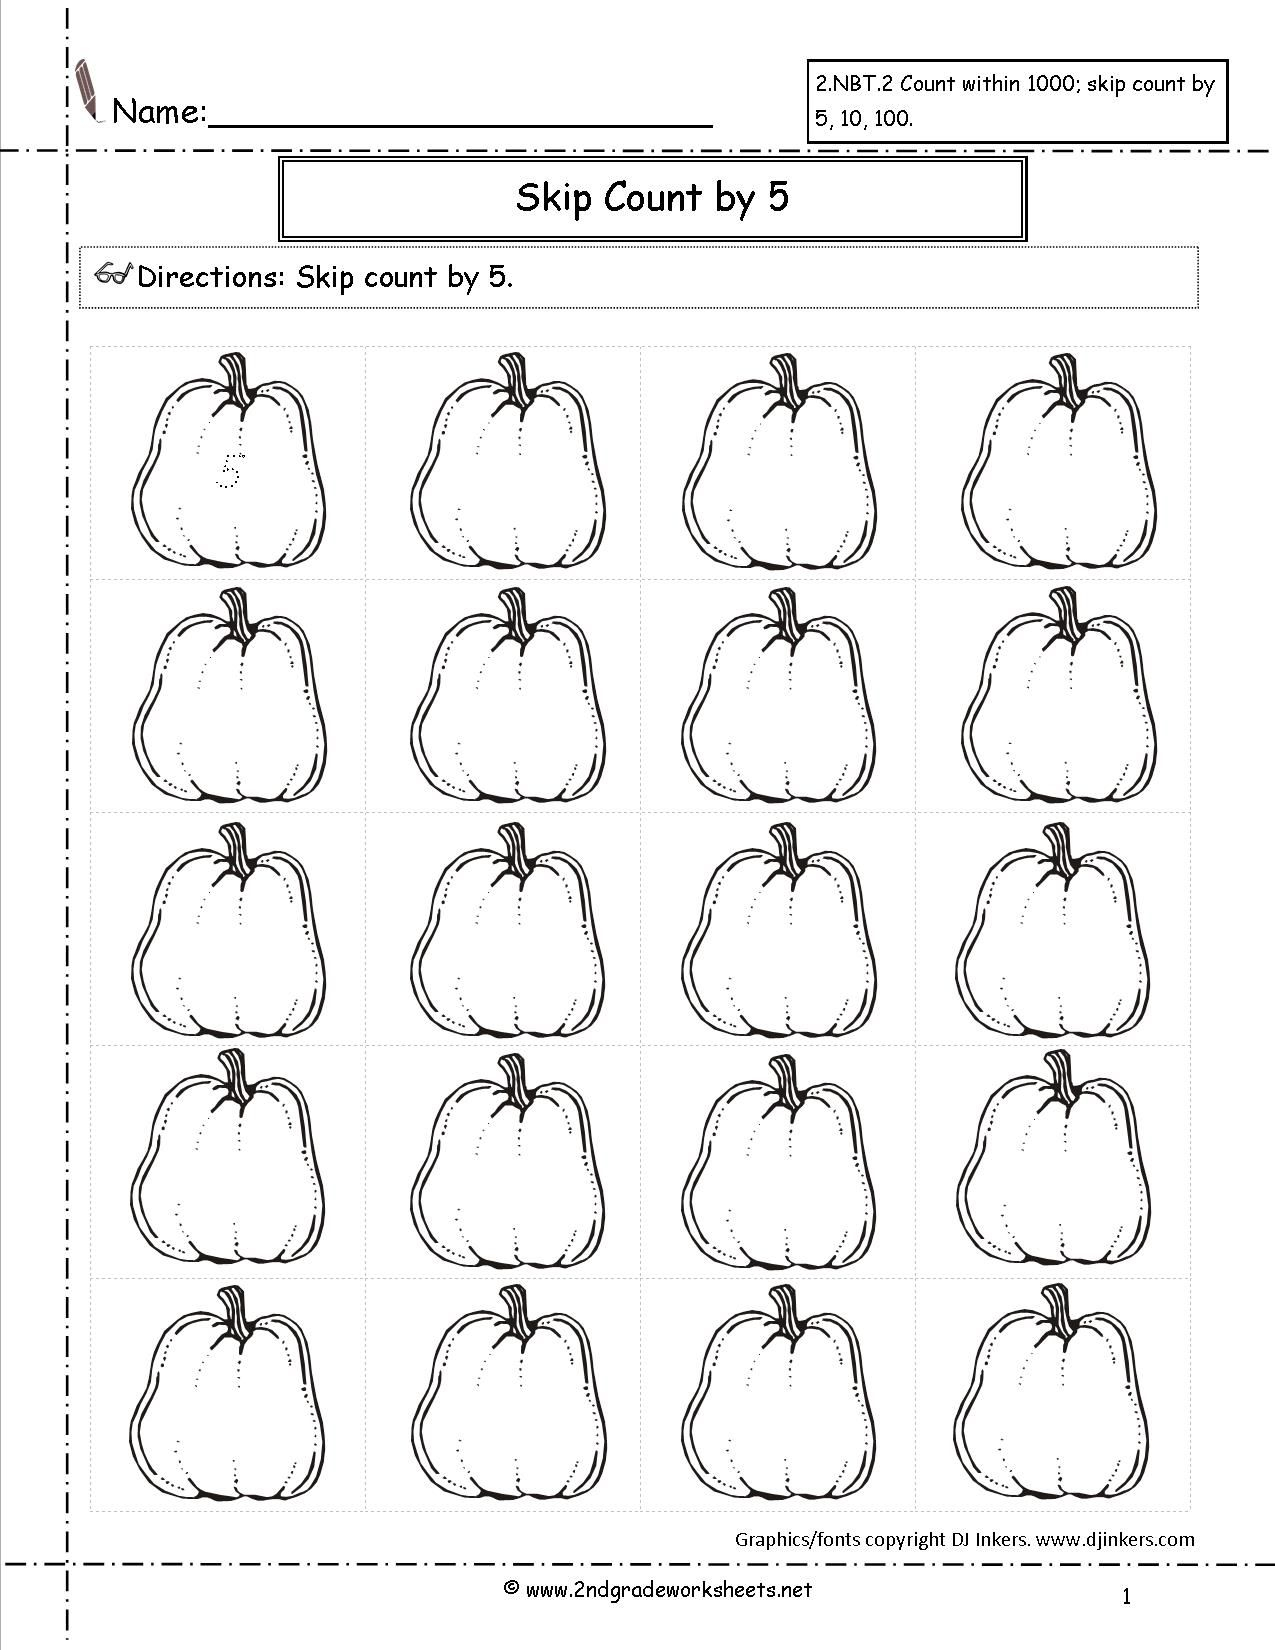 Halloween Printouts From The Teacher&amp;#039;s Guide | Halloween